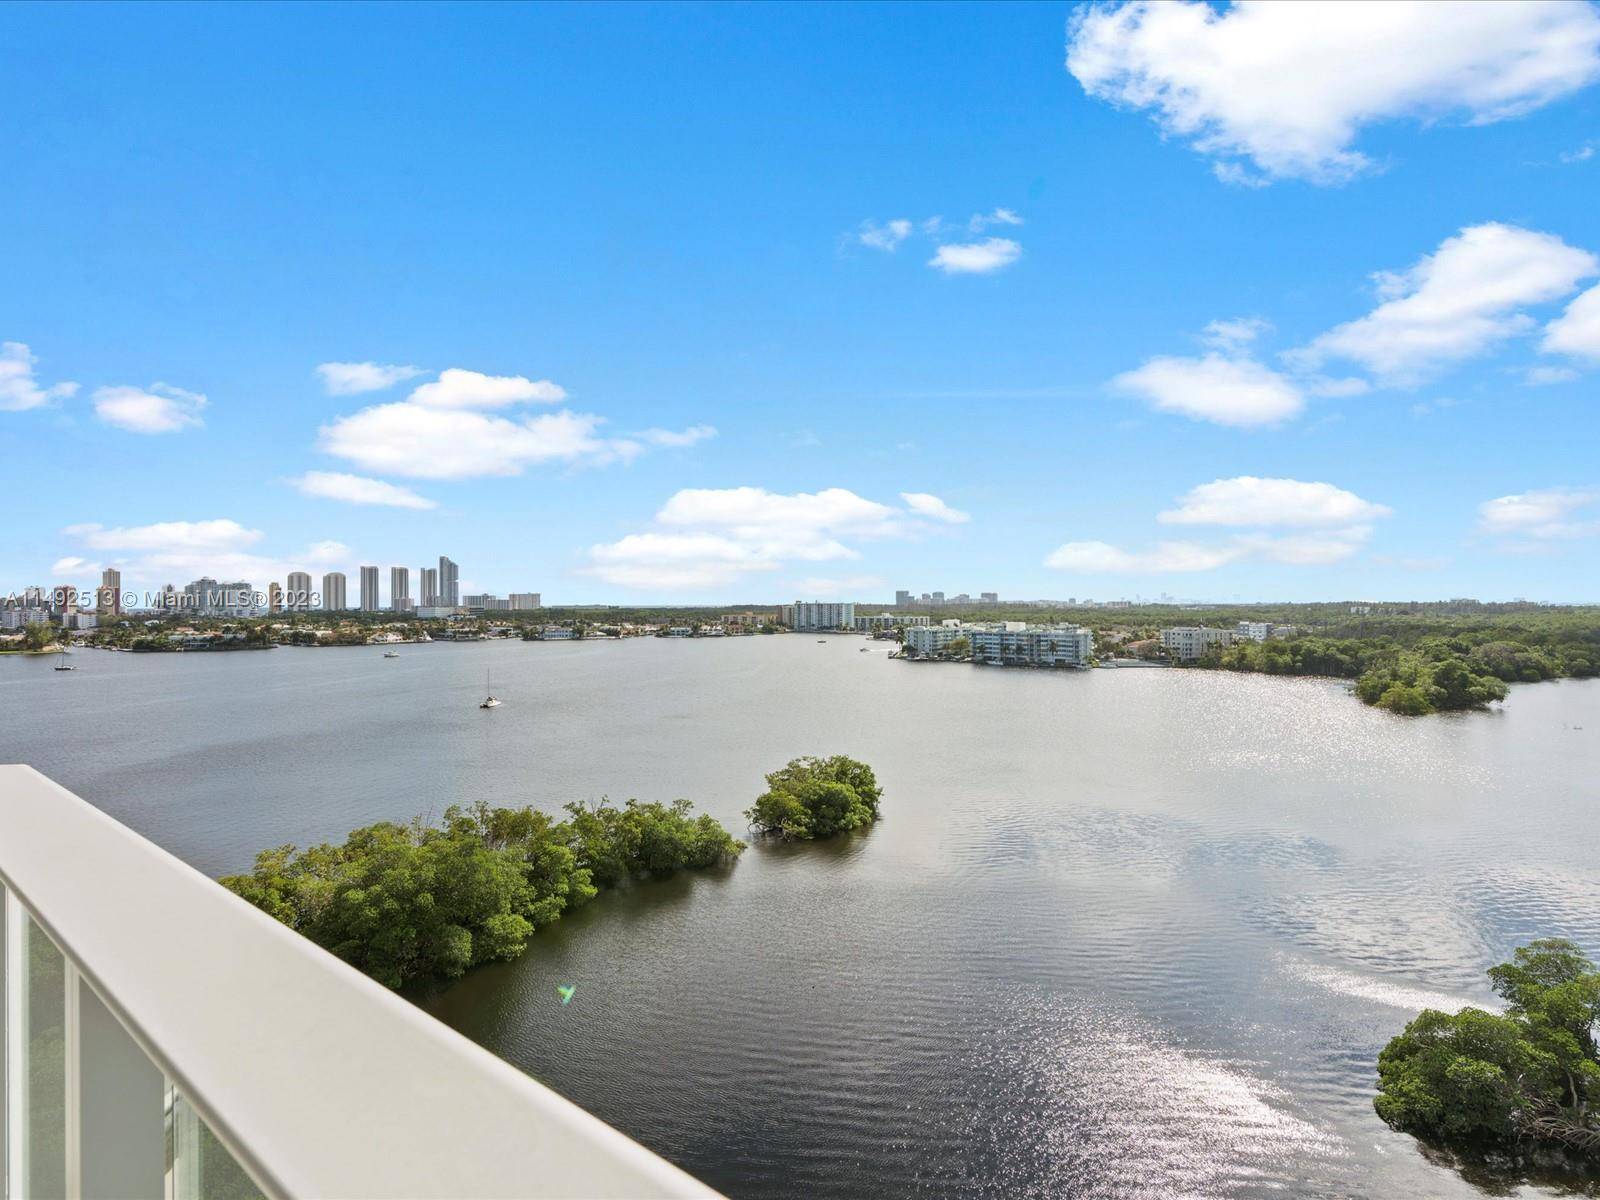 Introducing an exquisite 2 bedroom 3 bathroom unit plus DEN, boasting direct bay and intracoastal views.